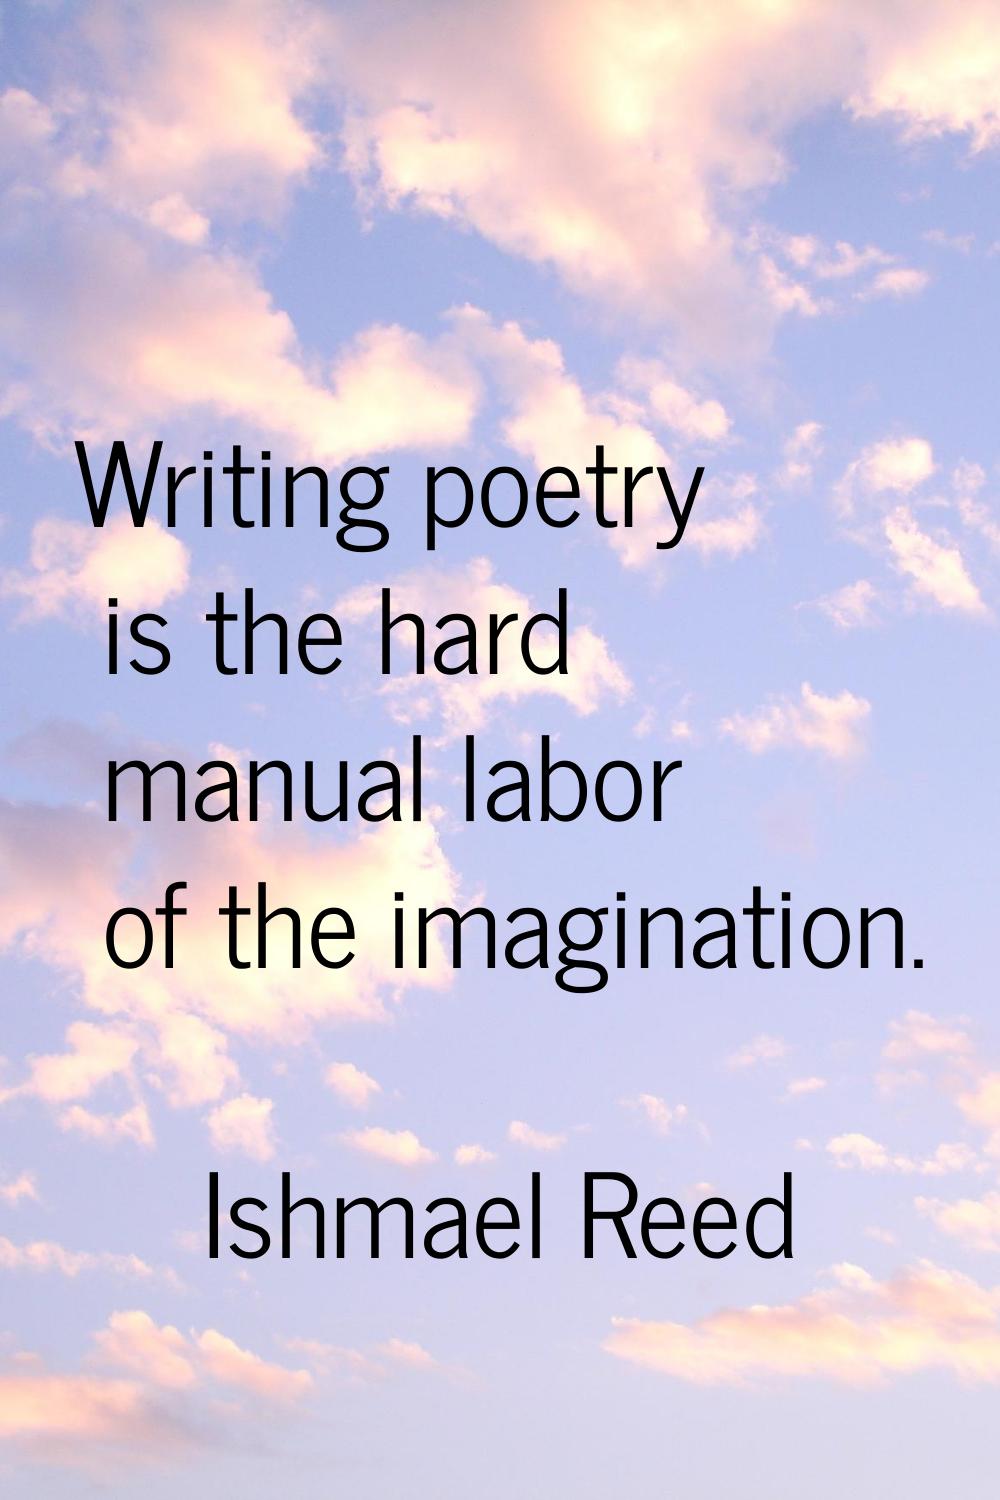 Writing poetry is the hard manual labor of the imagination.